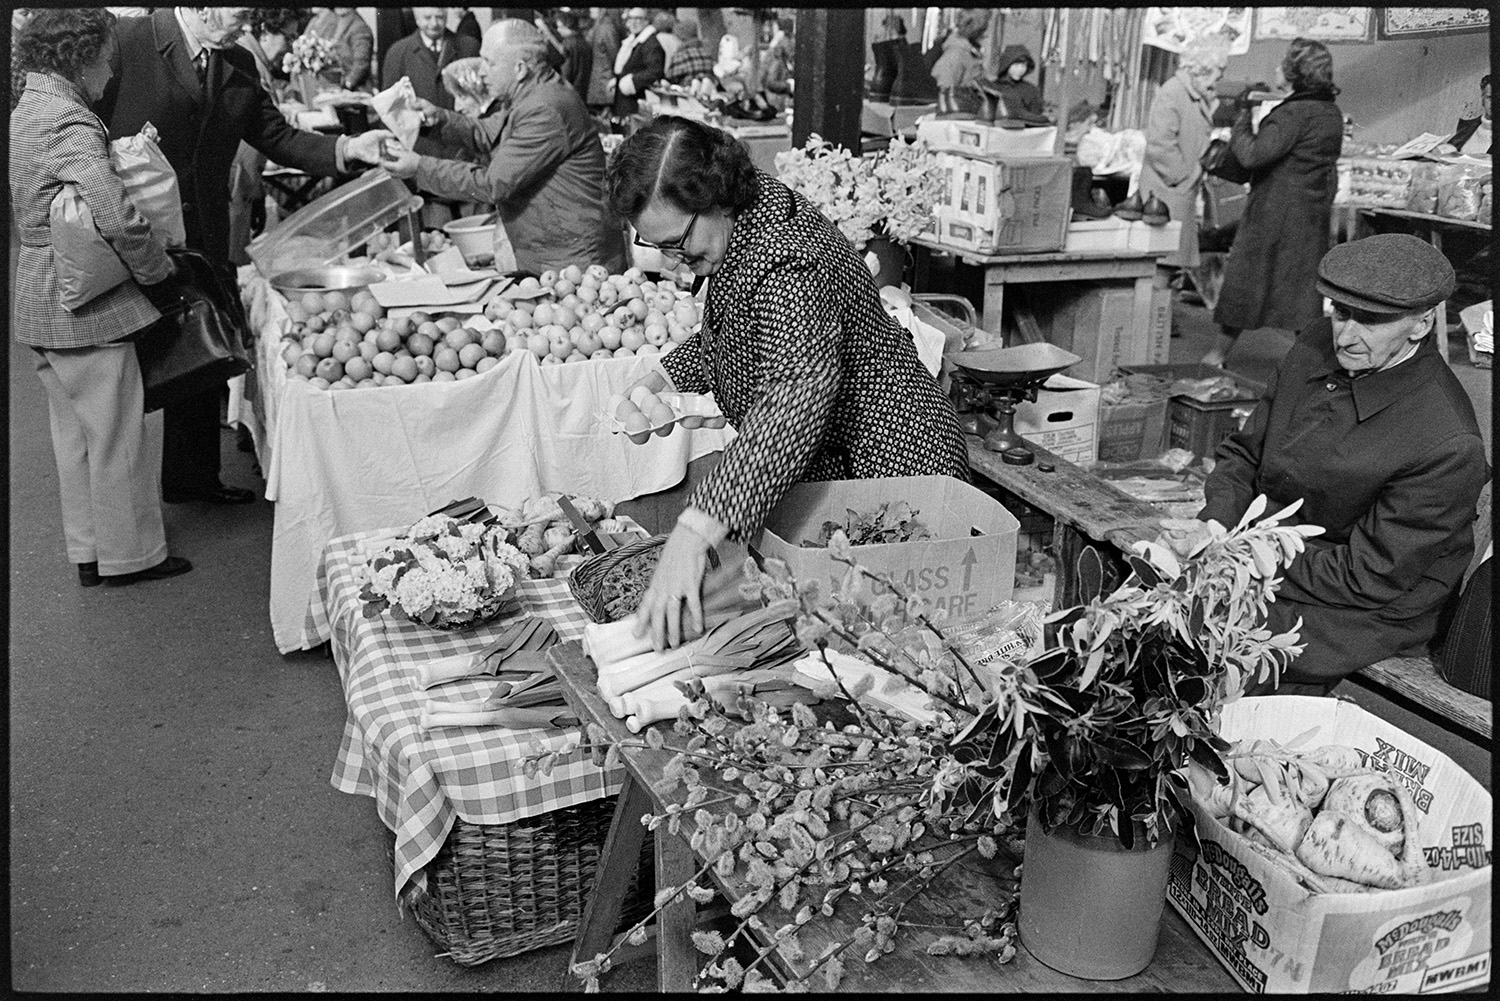 Stalls at Pannier market. Eggs, vegetables, flowers.
[A woman and man running a vegetable stall at Barnstaple Pannier Market. They are selling leeks, flowers and parsnips, amongst other goods. Customers and other stalls can be seen in the background.]